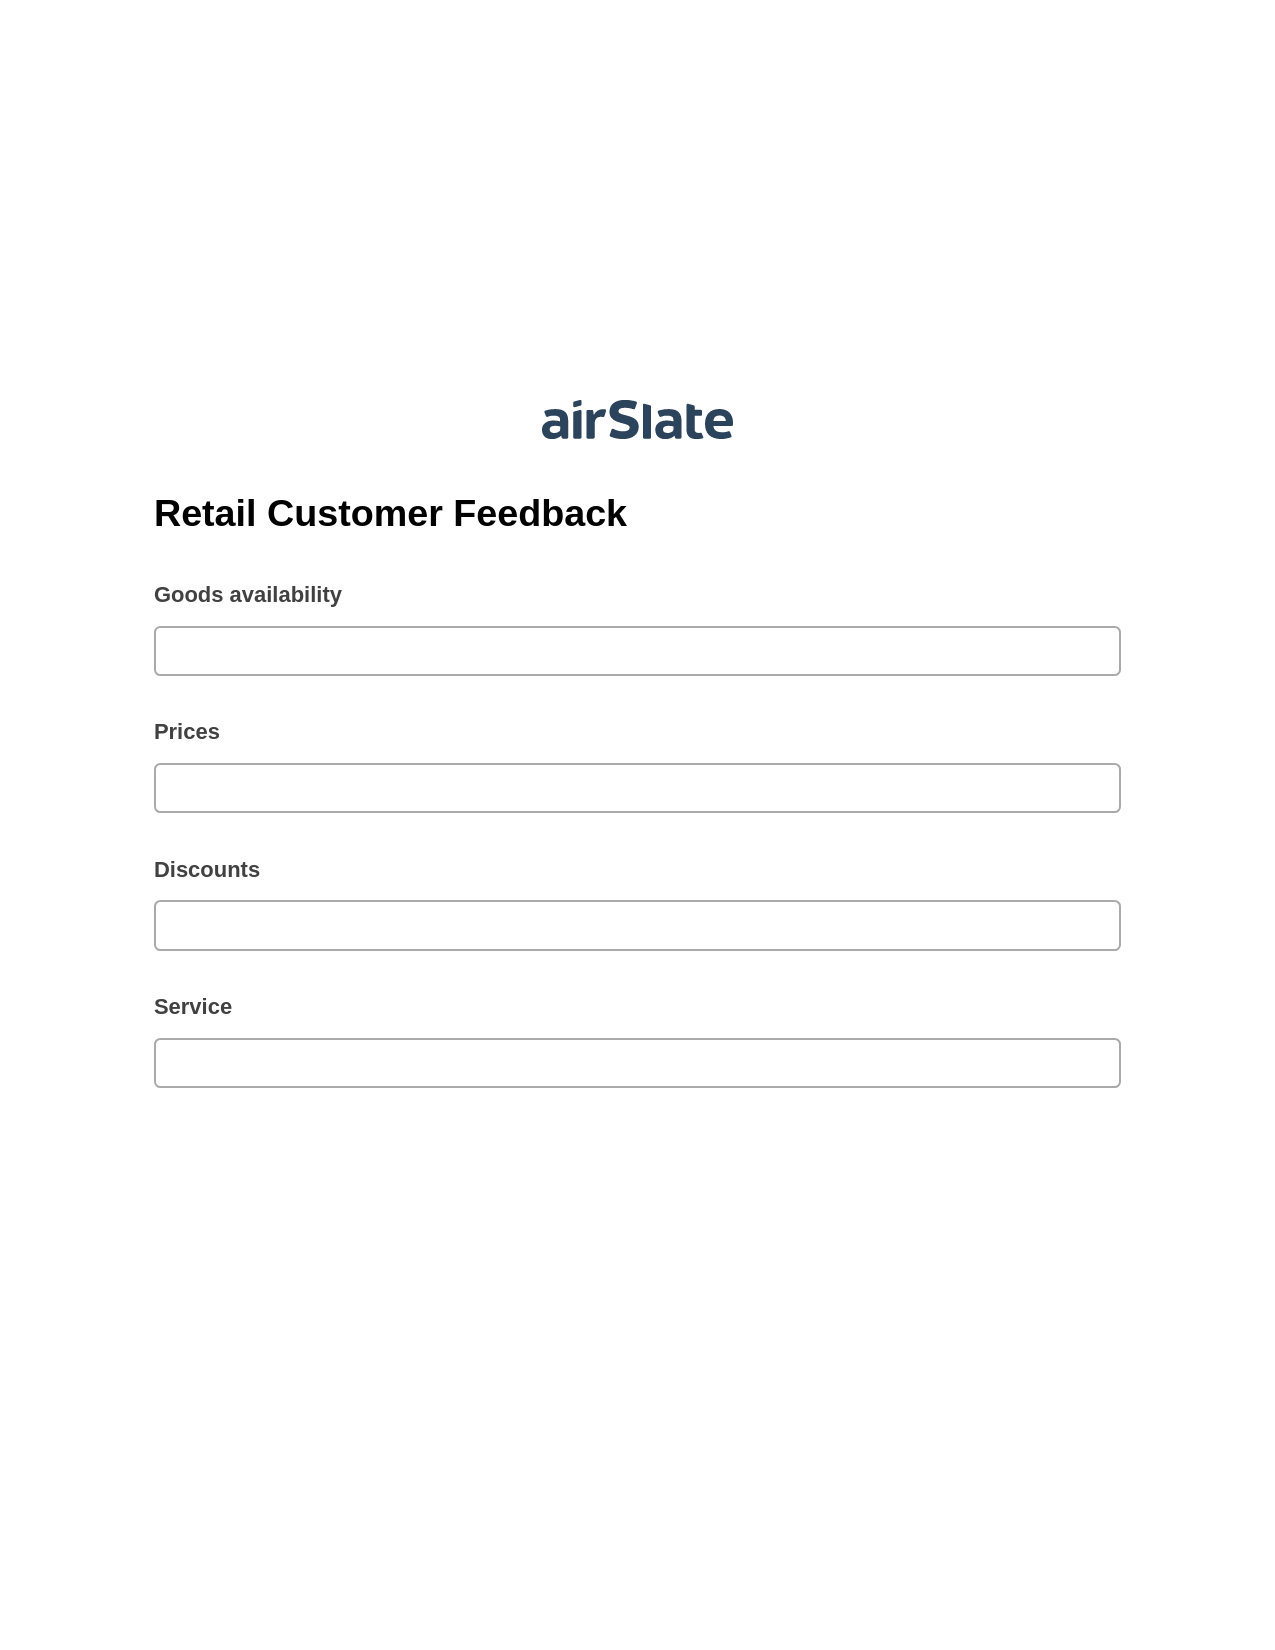 Retail Customer Feedback Pre-fill from another Slate Bot, Email Notification Bot, Export to Salesforce Bot